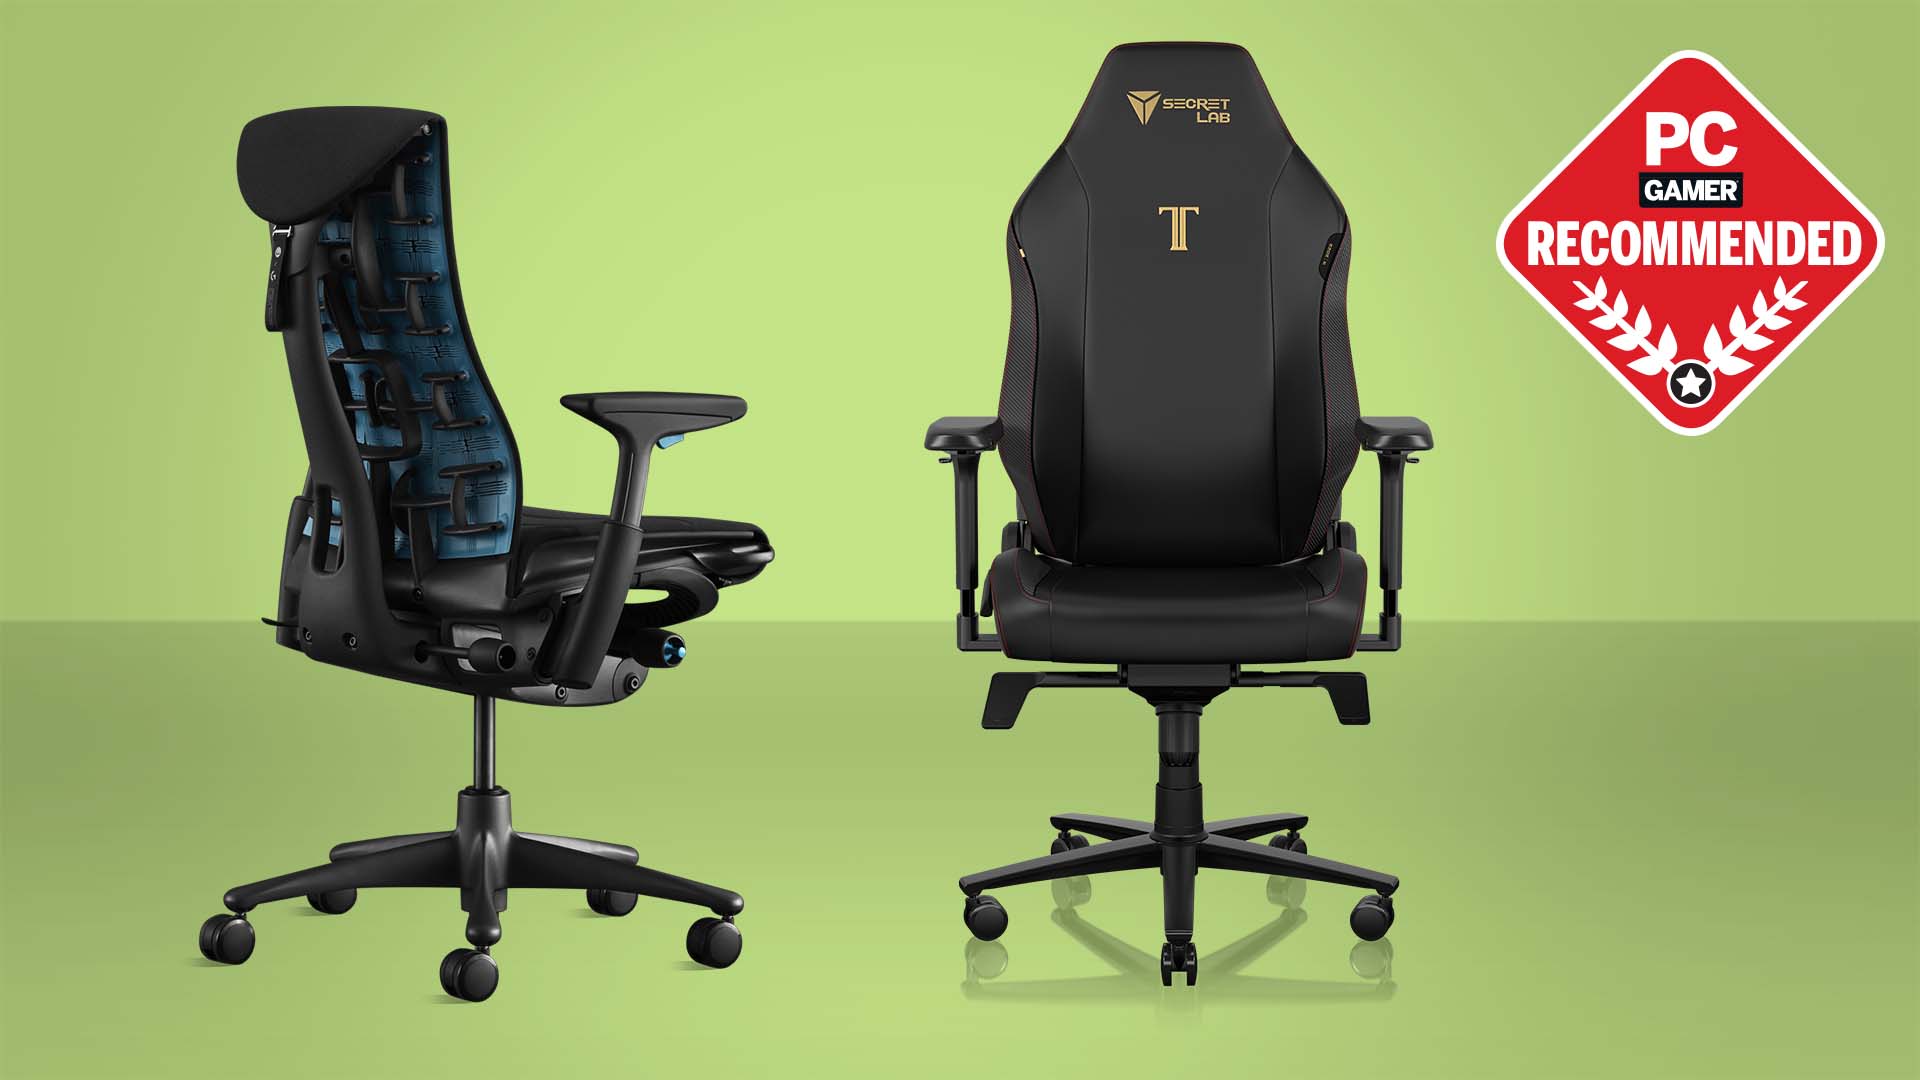 The Best Gaming Chairs In 2021 Pc Gamer, Round Base Gaming Chair